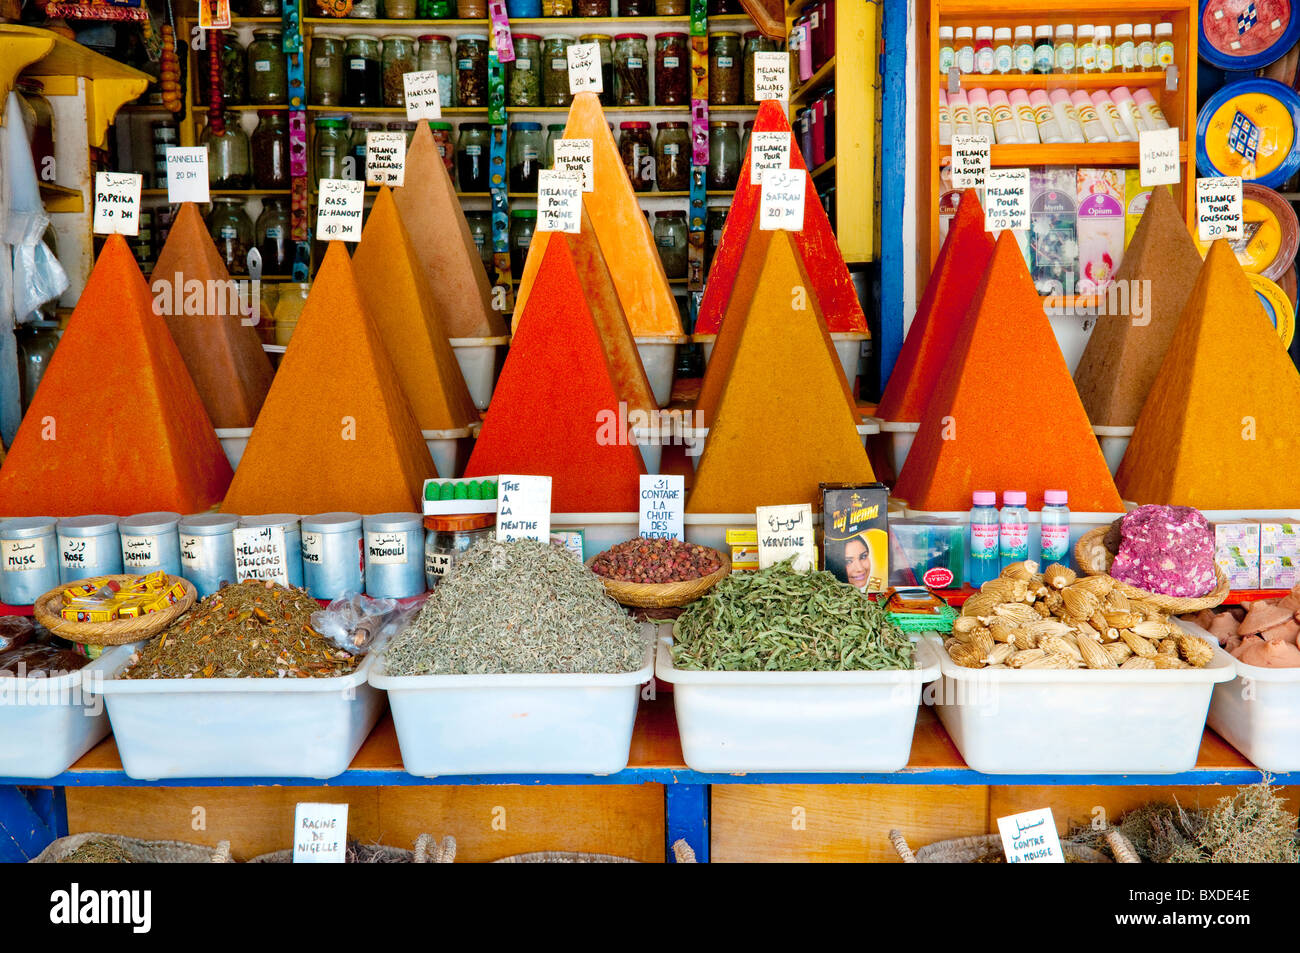 A colorful display of spices in pyramid shaped piles in the souq market of Essaouira, Morocco. Stock Photo